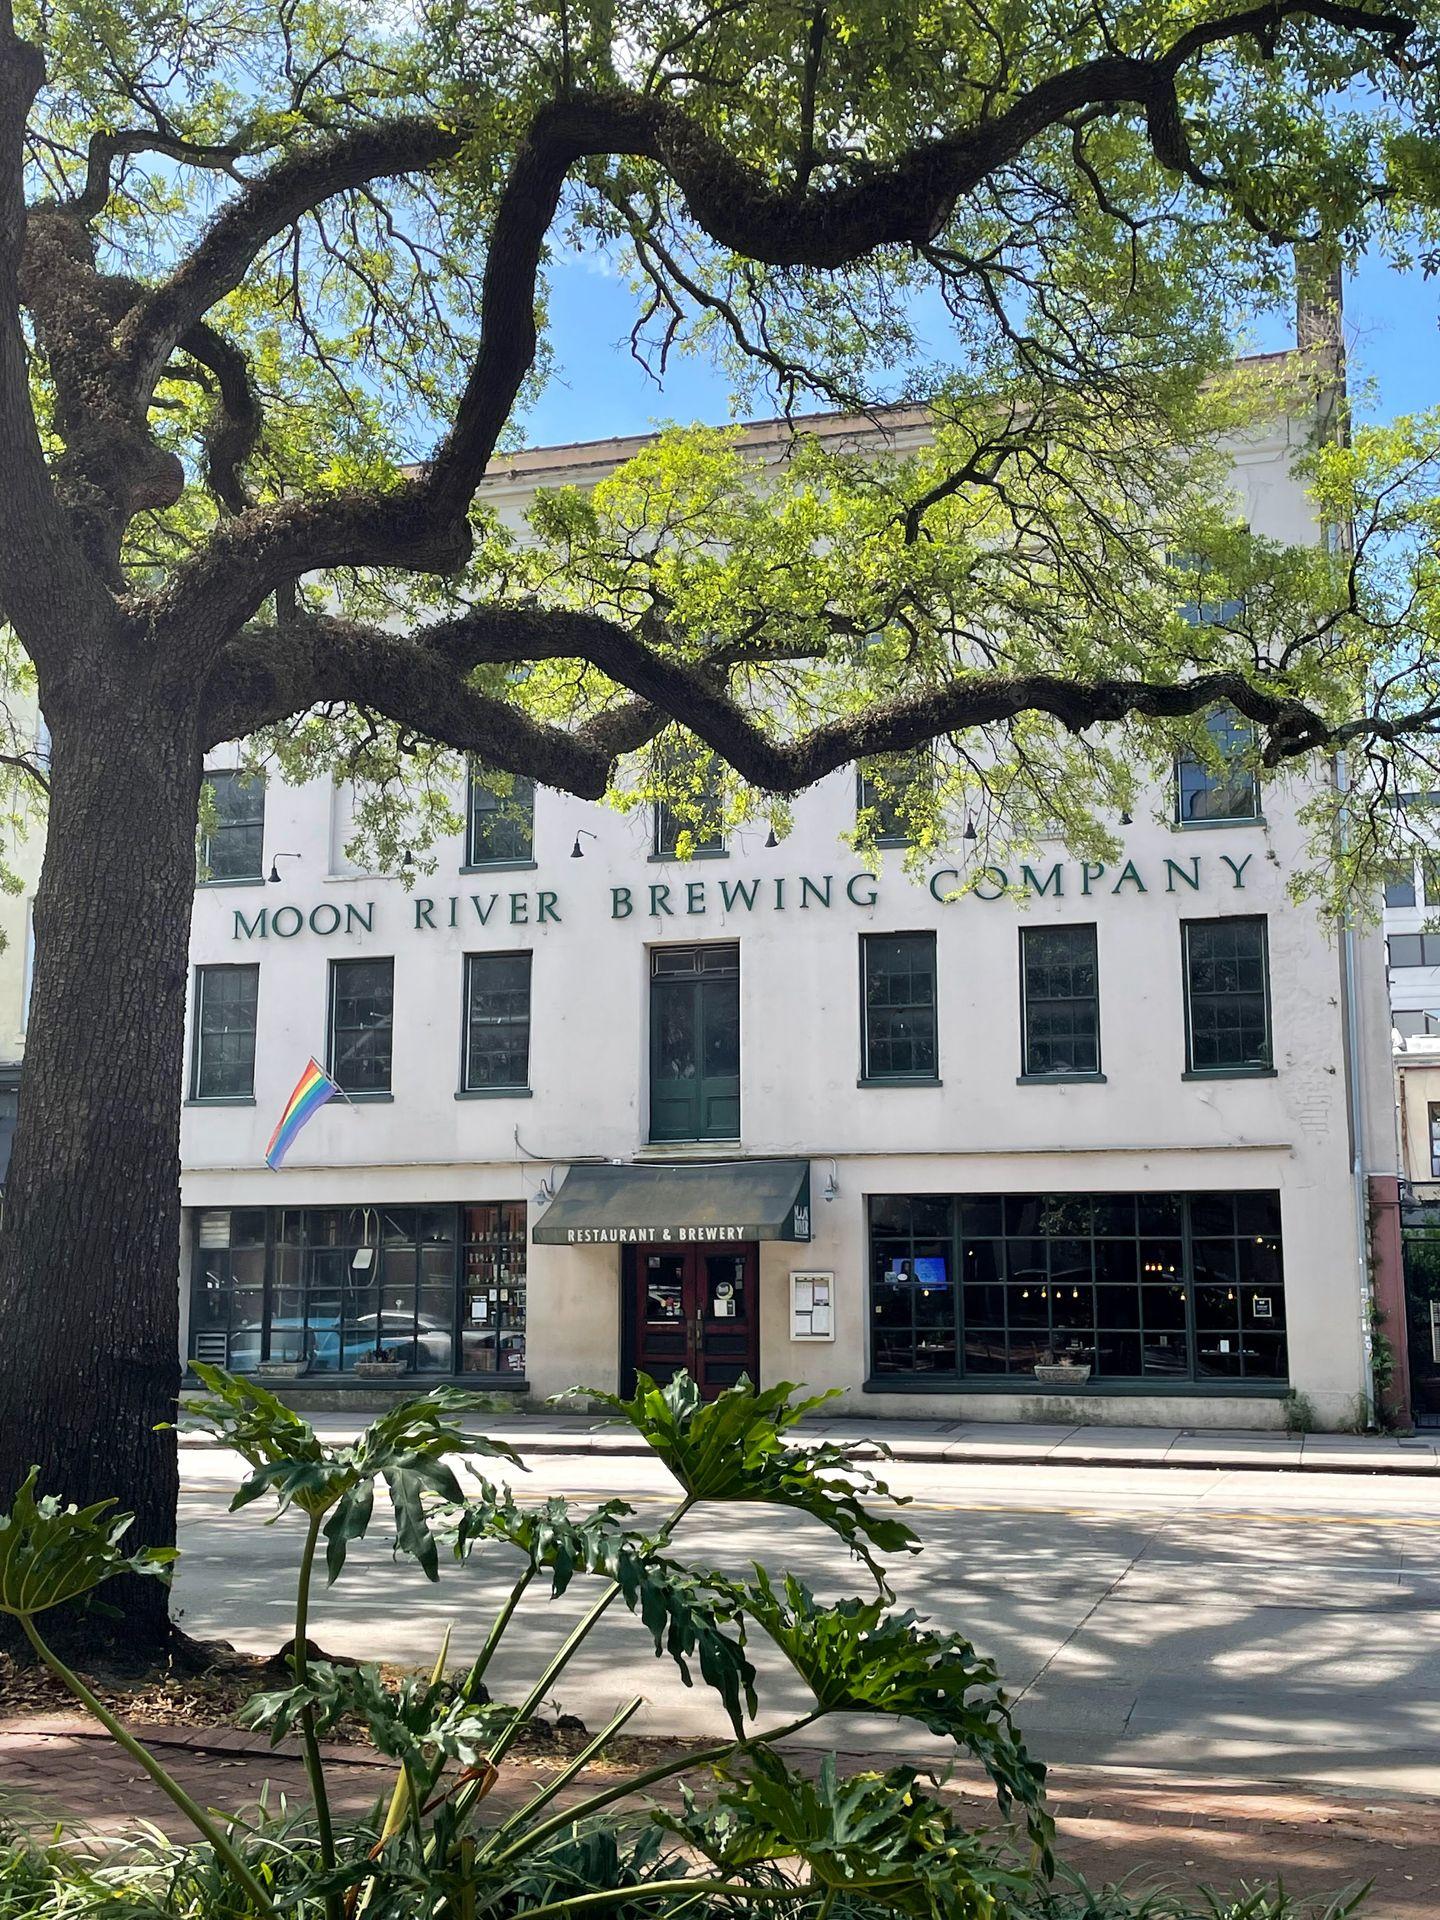 A view of the exterior of the Moon River Brewing Company